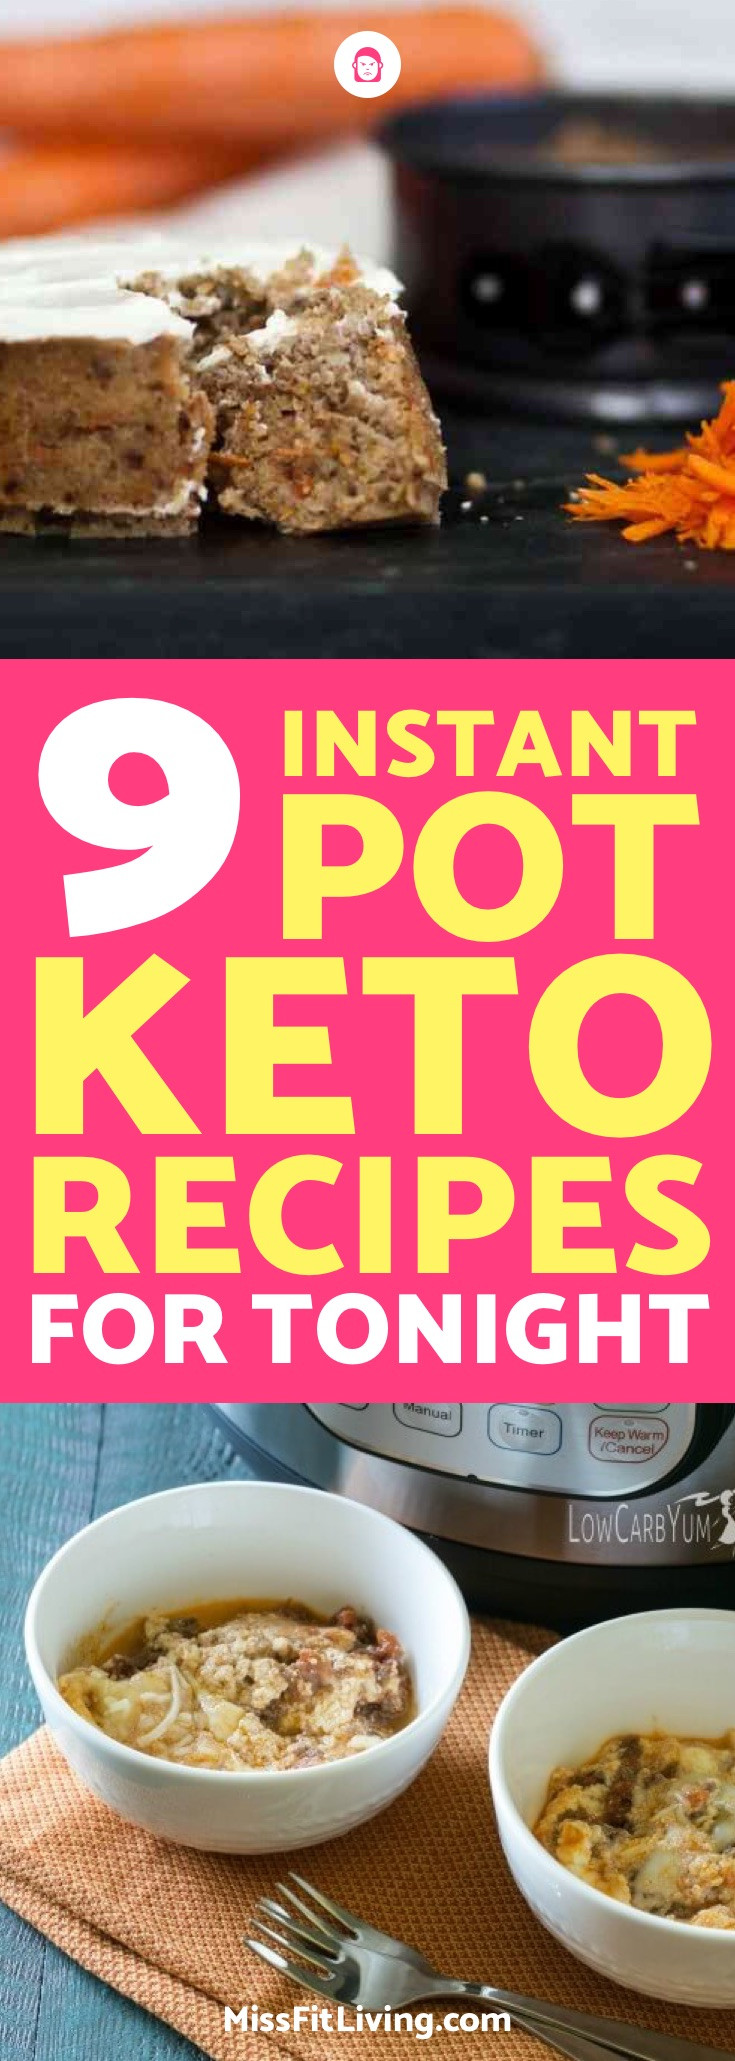 Instant Pot Keto Videos
 9 Instant Pot Keto Recipes To Try Tonight While Doing the